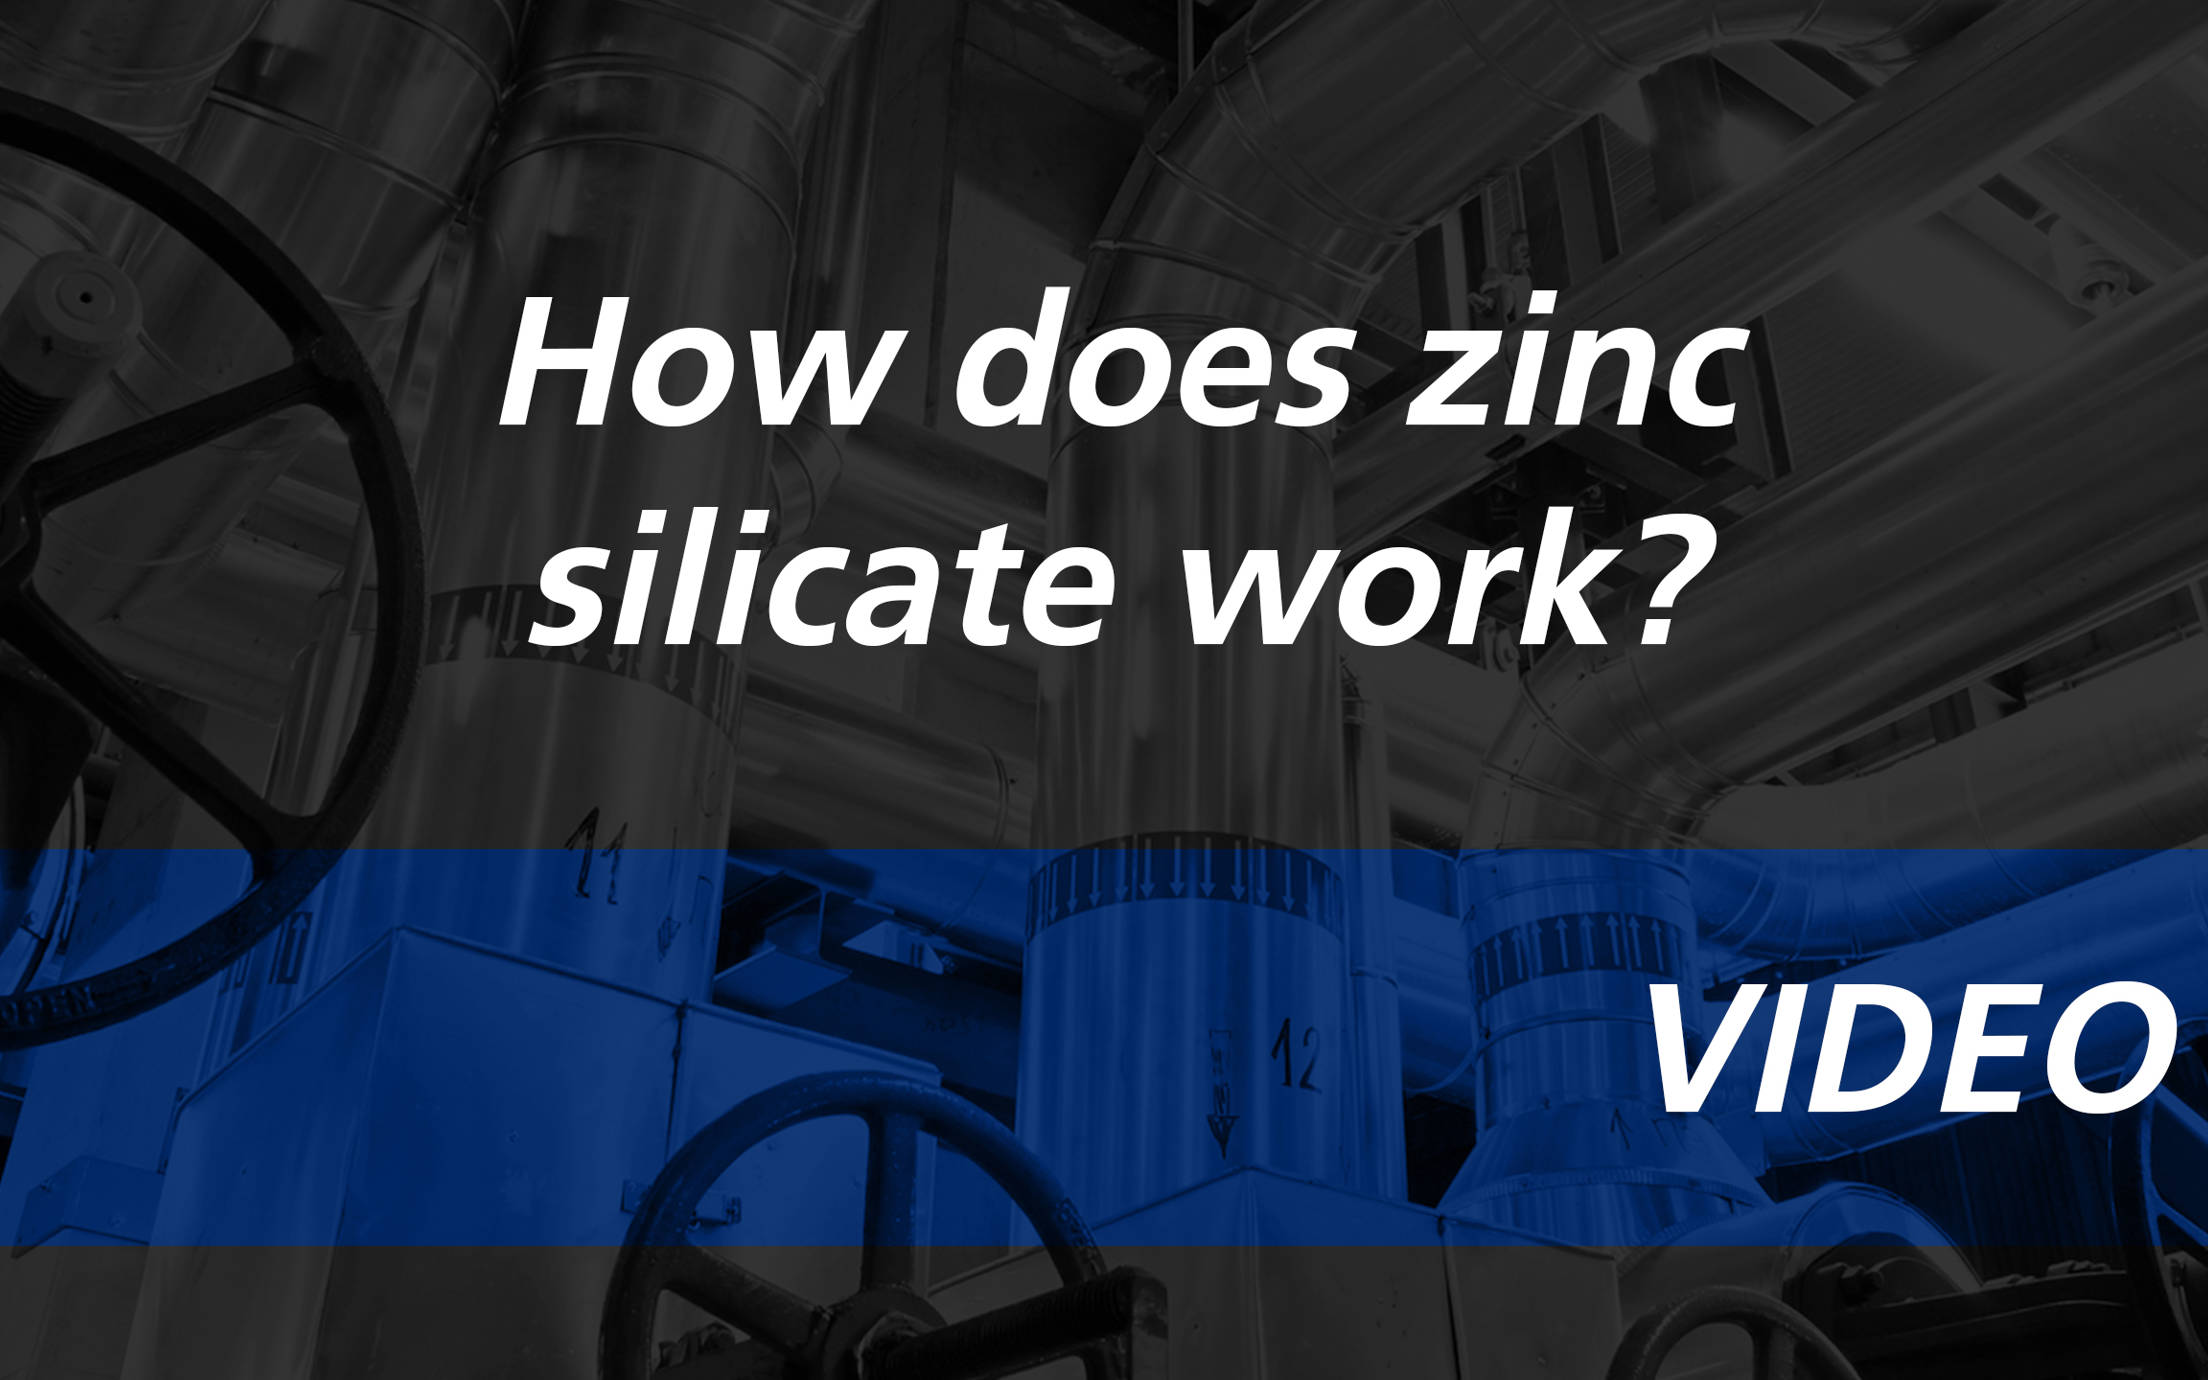 How does zinc silicate work video thumbnail